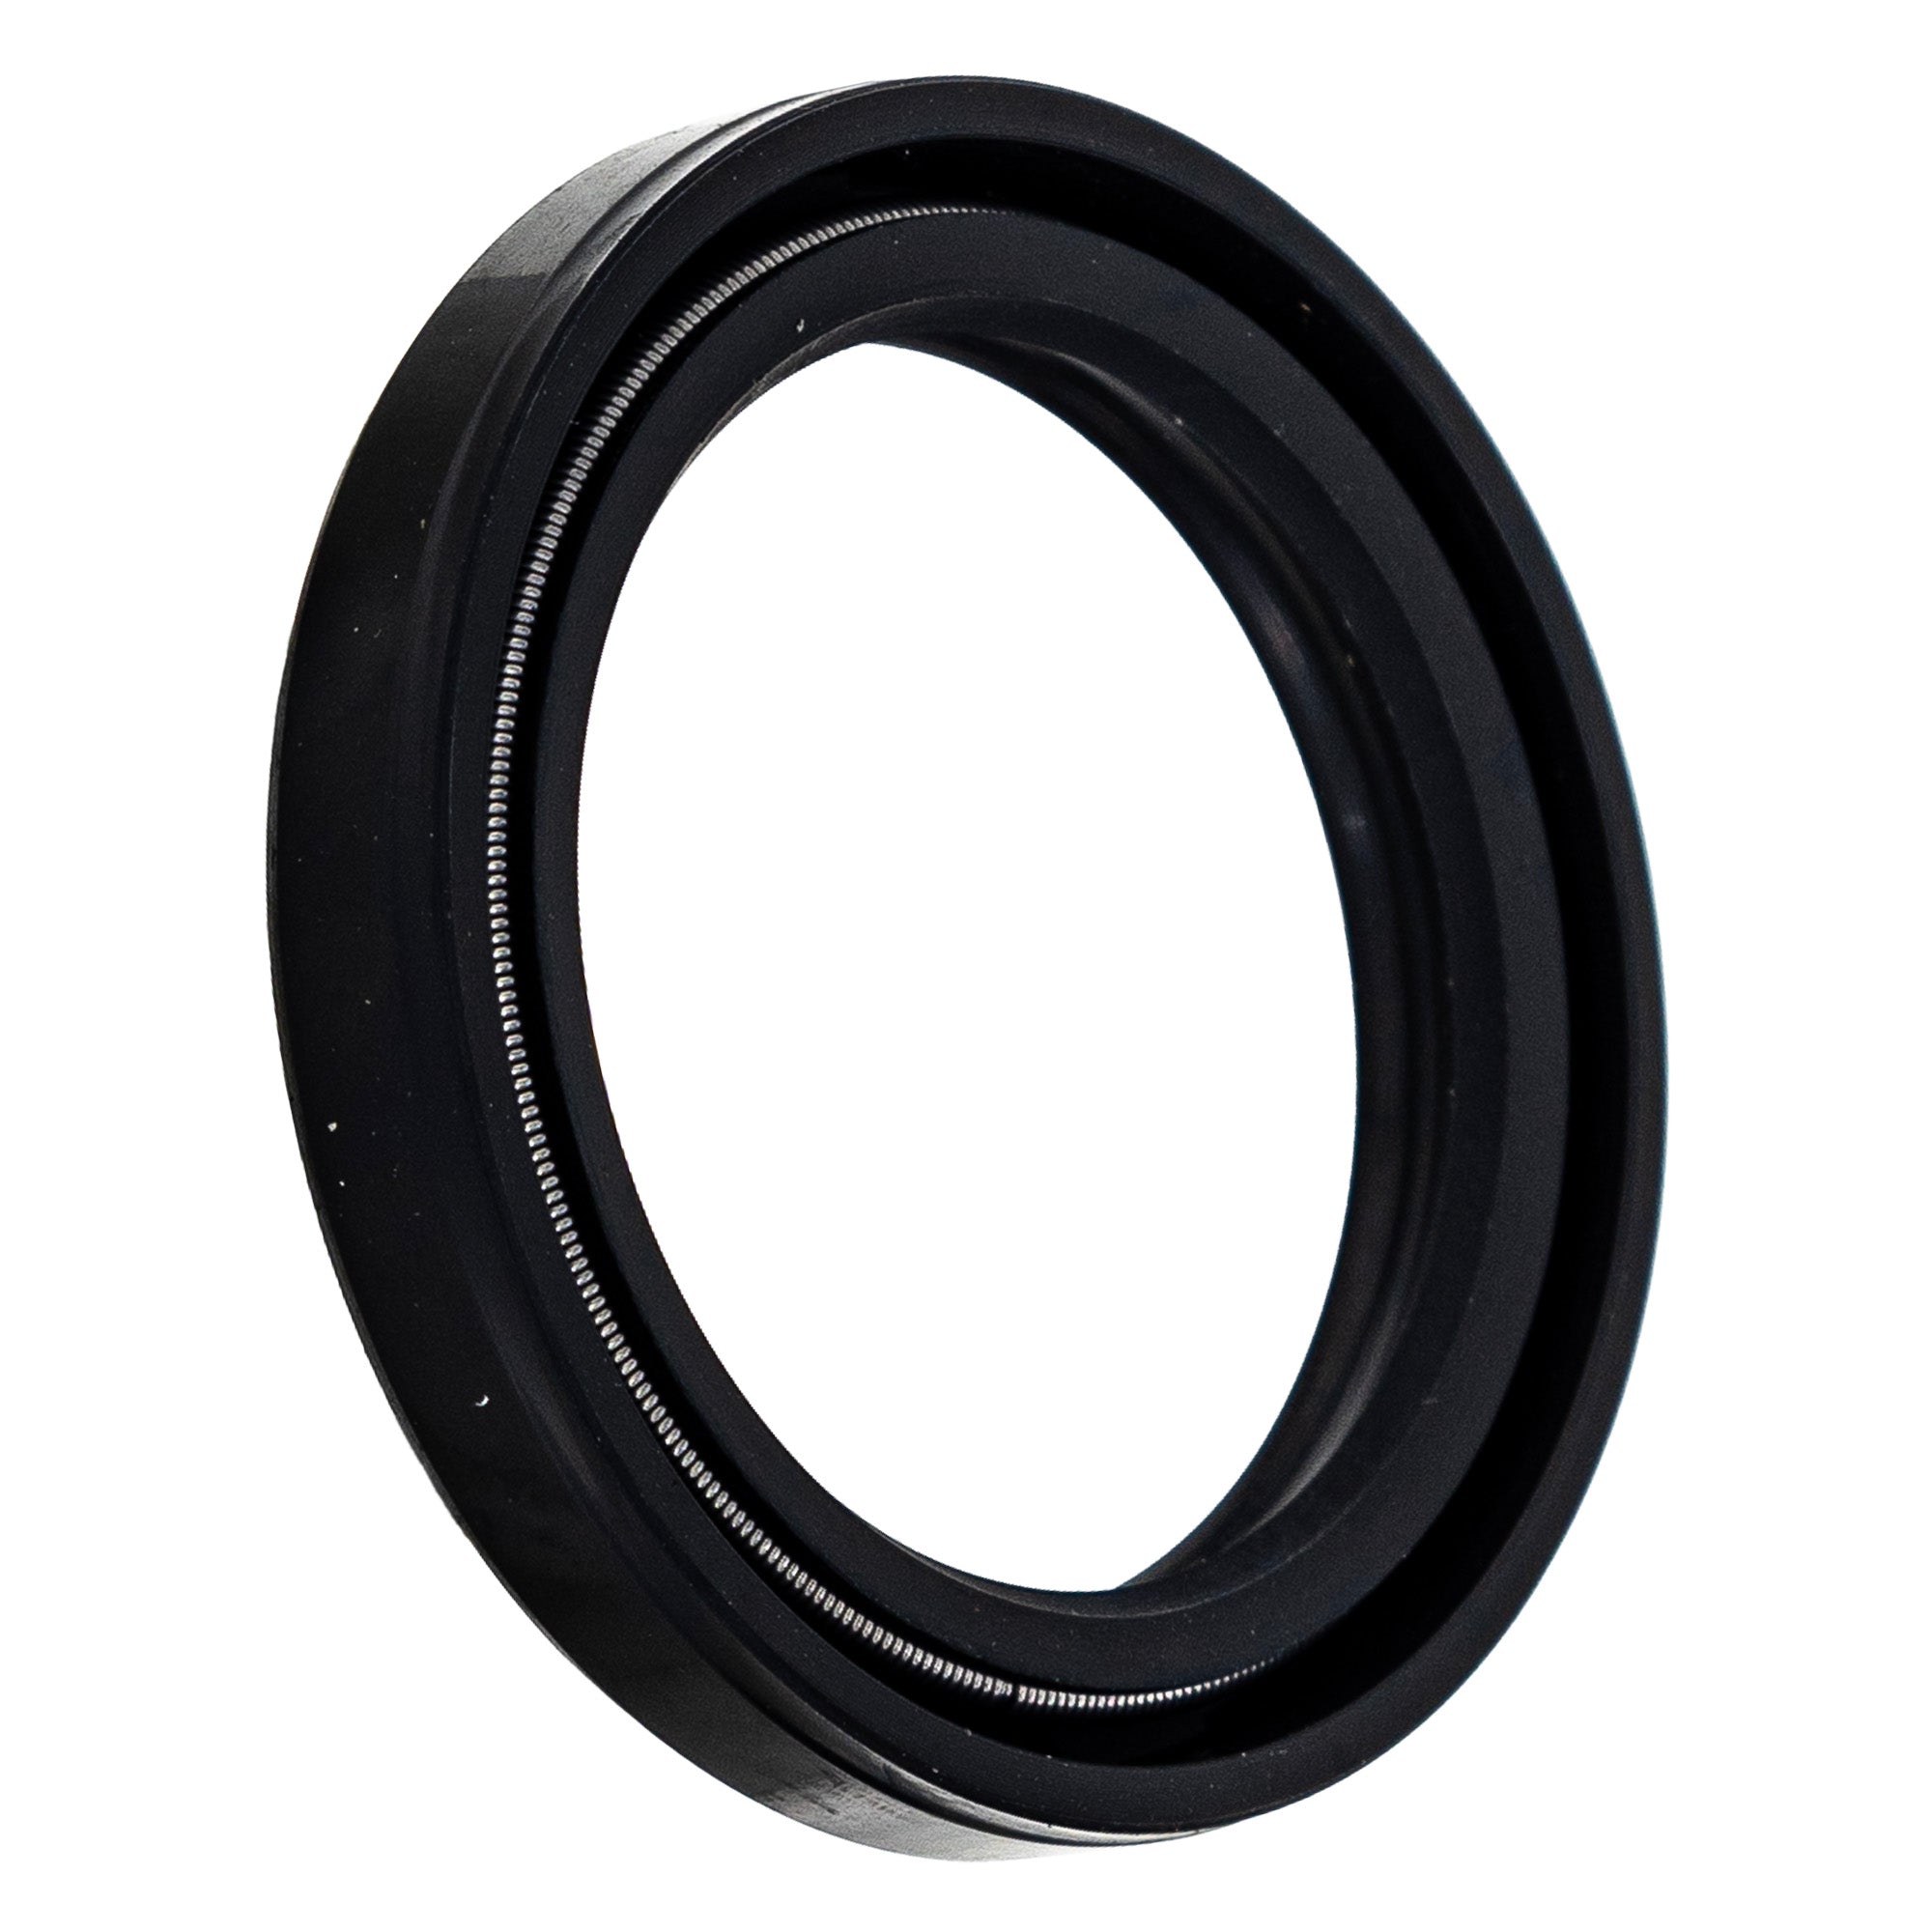 Oil Seal for Yamaha 93102-35318-00 Mountain Max 600 700 TC 35x47x7mm